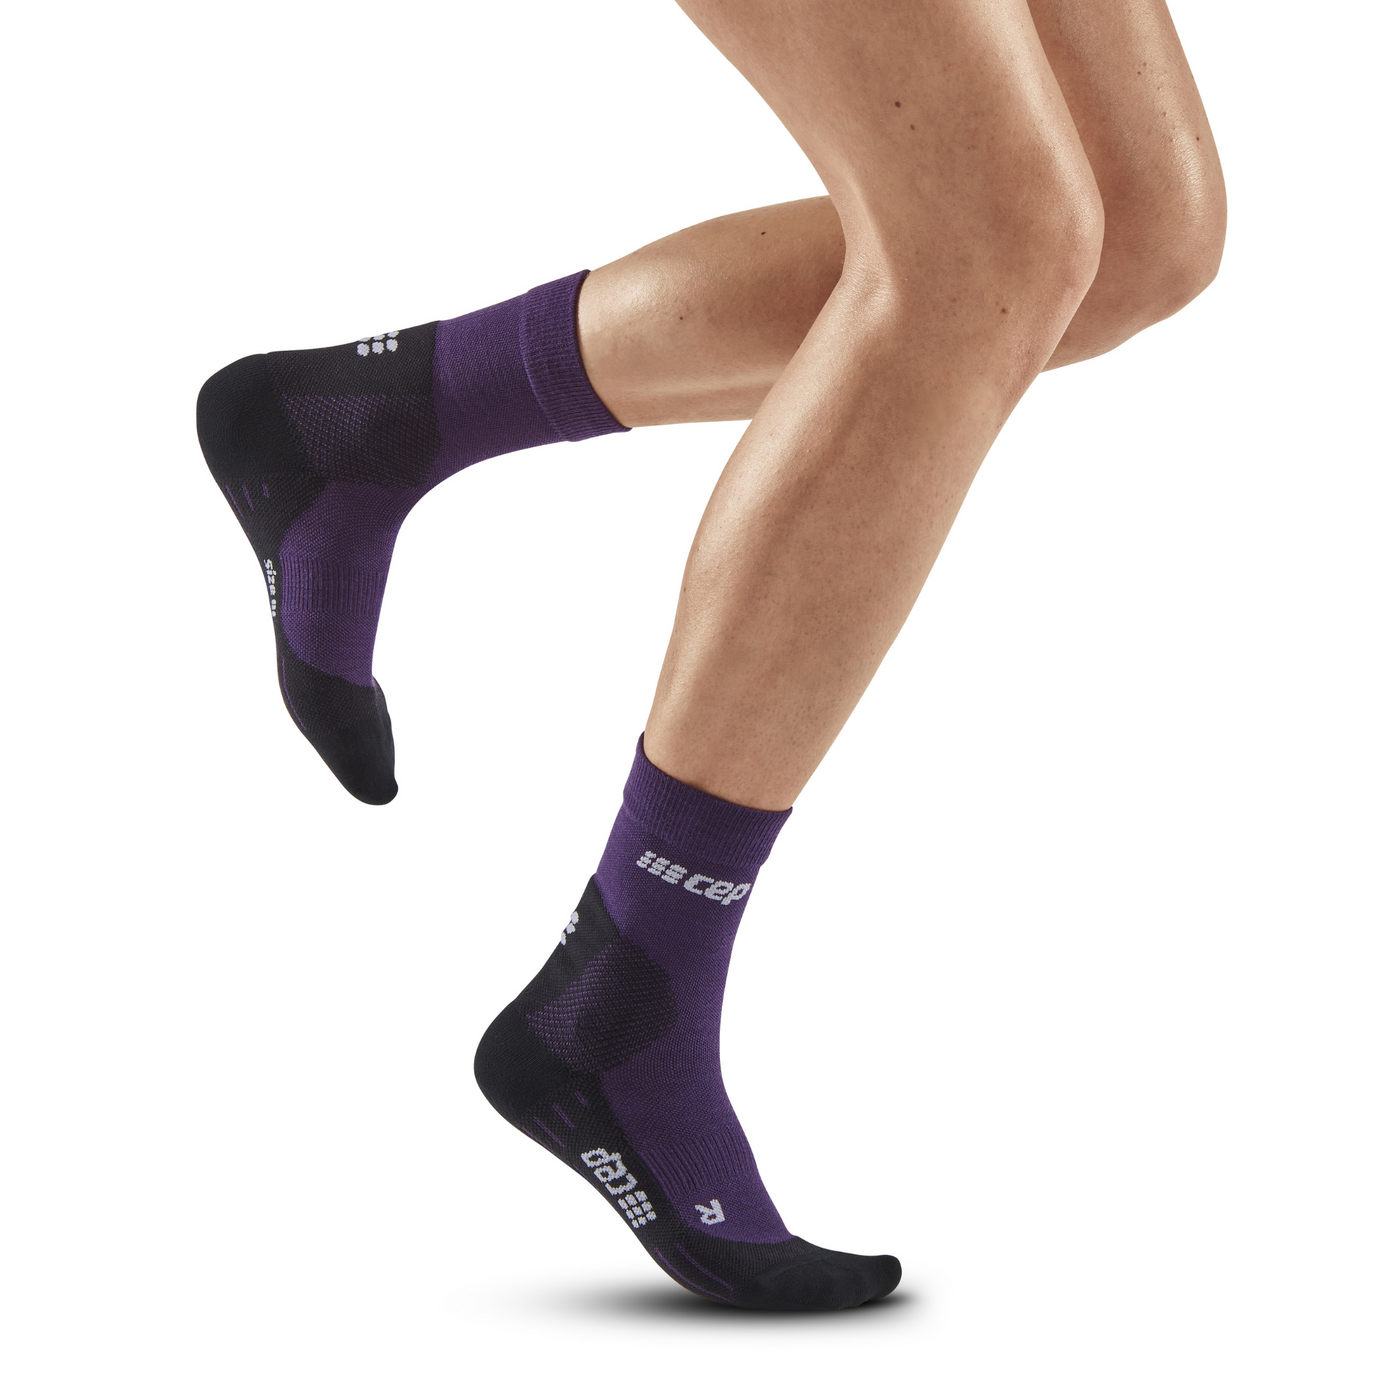 Cold Weather Mid Cut Compression Socks, Women